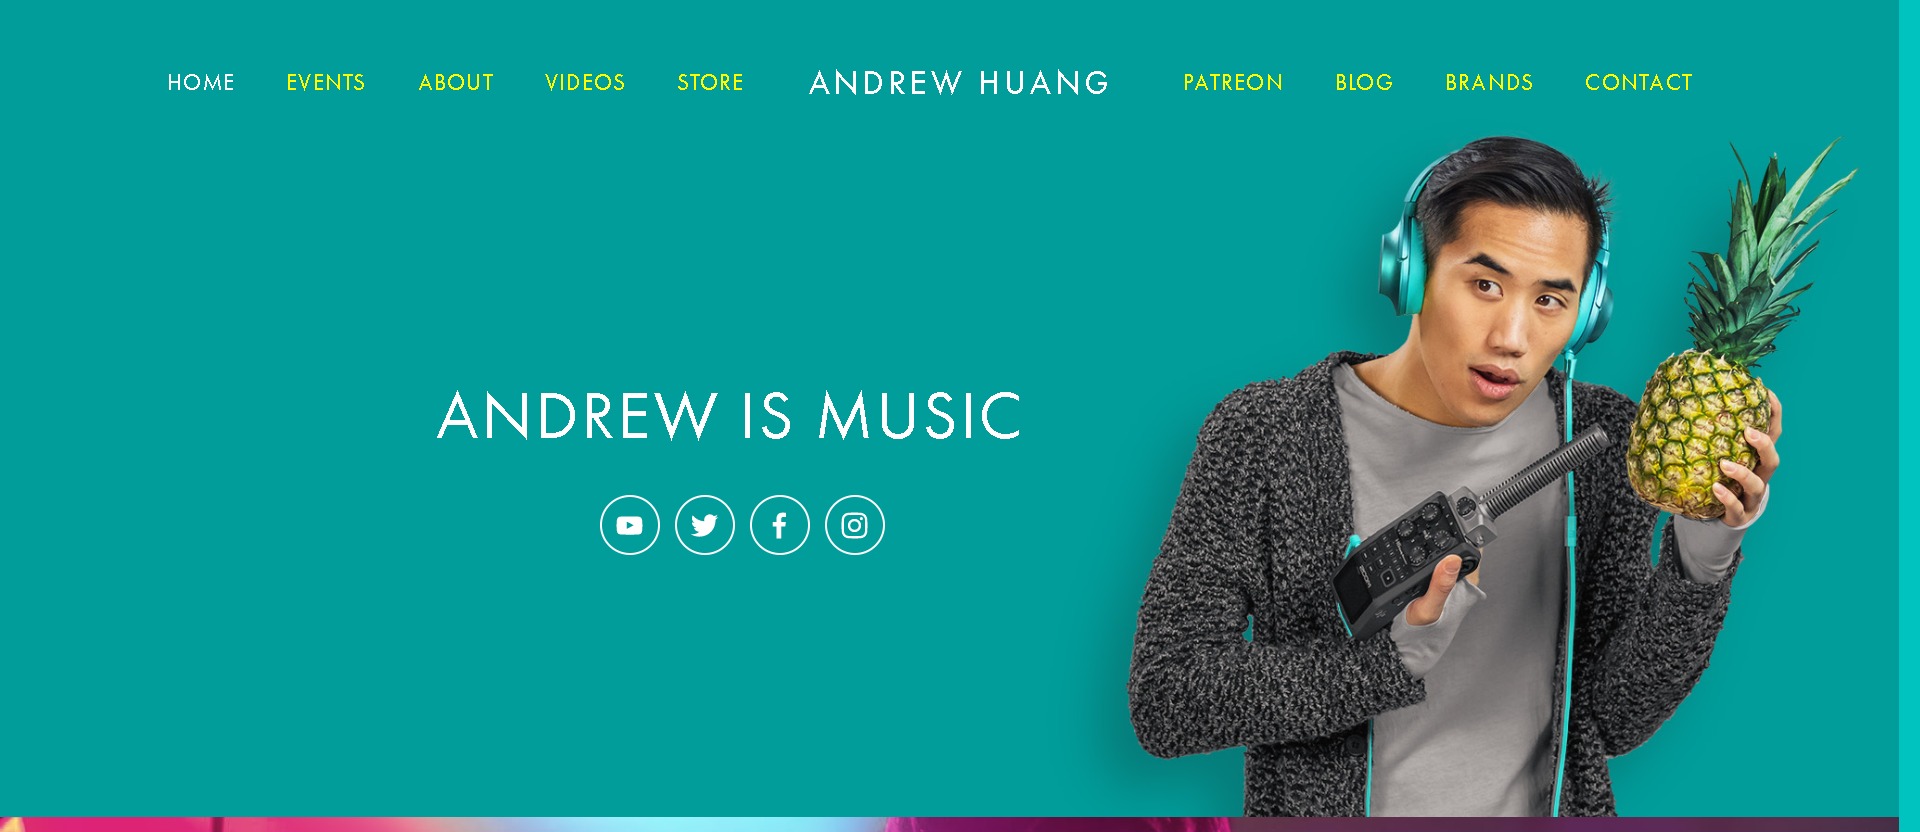 exemple-site-internet-musicien-andrew-huang-squarespace